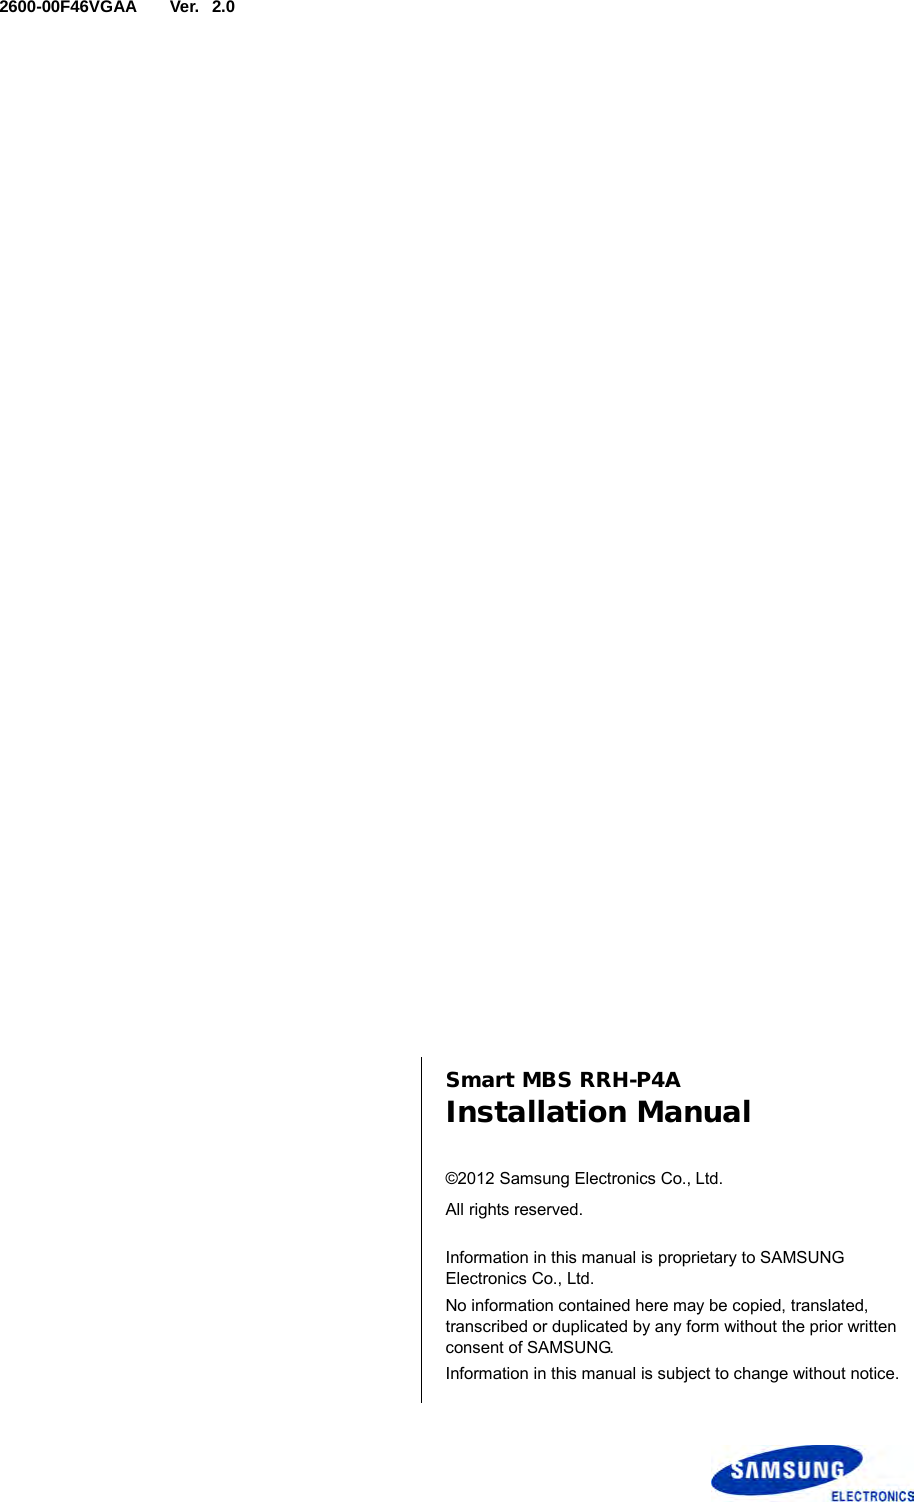  Ver.   2600-00F46VGAA 2.0      Smart MBS RRH-P4A Installation Manual  ©2012 Samsung Electronics Co., Ltd. All rights reserved.  Information in this manual is proprietary to SAMSUNG Electronics Co., Ltd. No information contained here may be copied, translated, transcribed or duplicated by any form without the prior written consent of SAMSUNG. Information in this manual is subject to change without notice.  